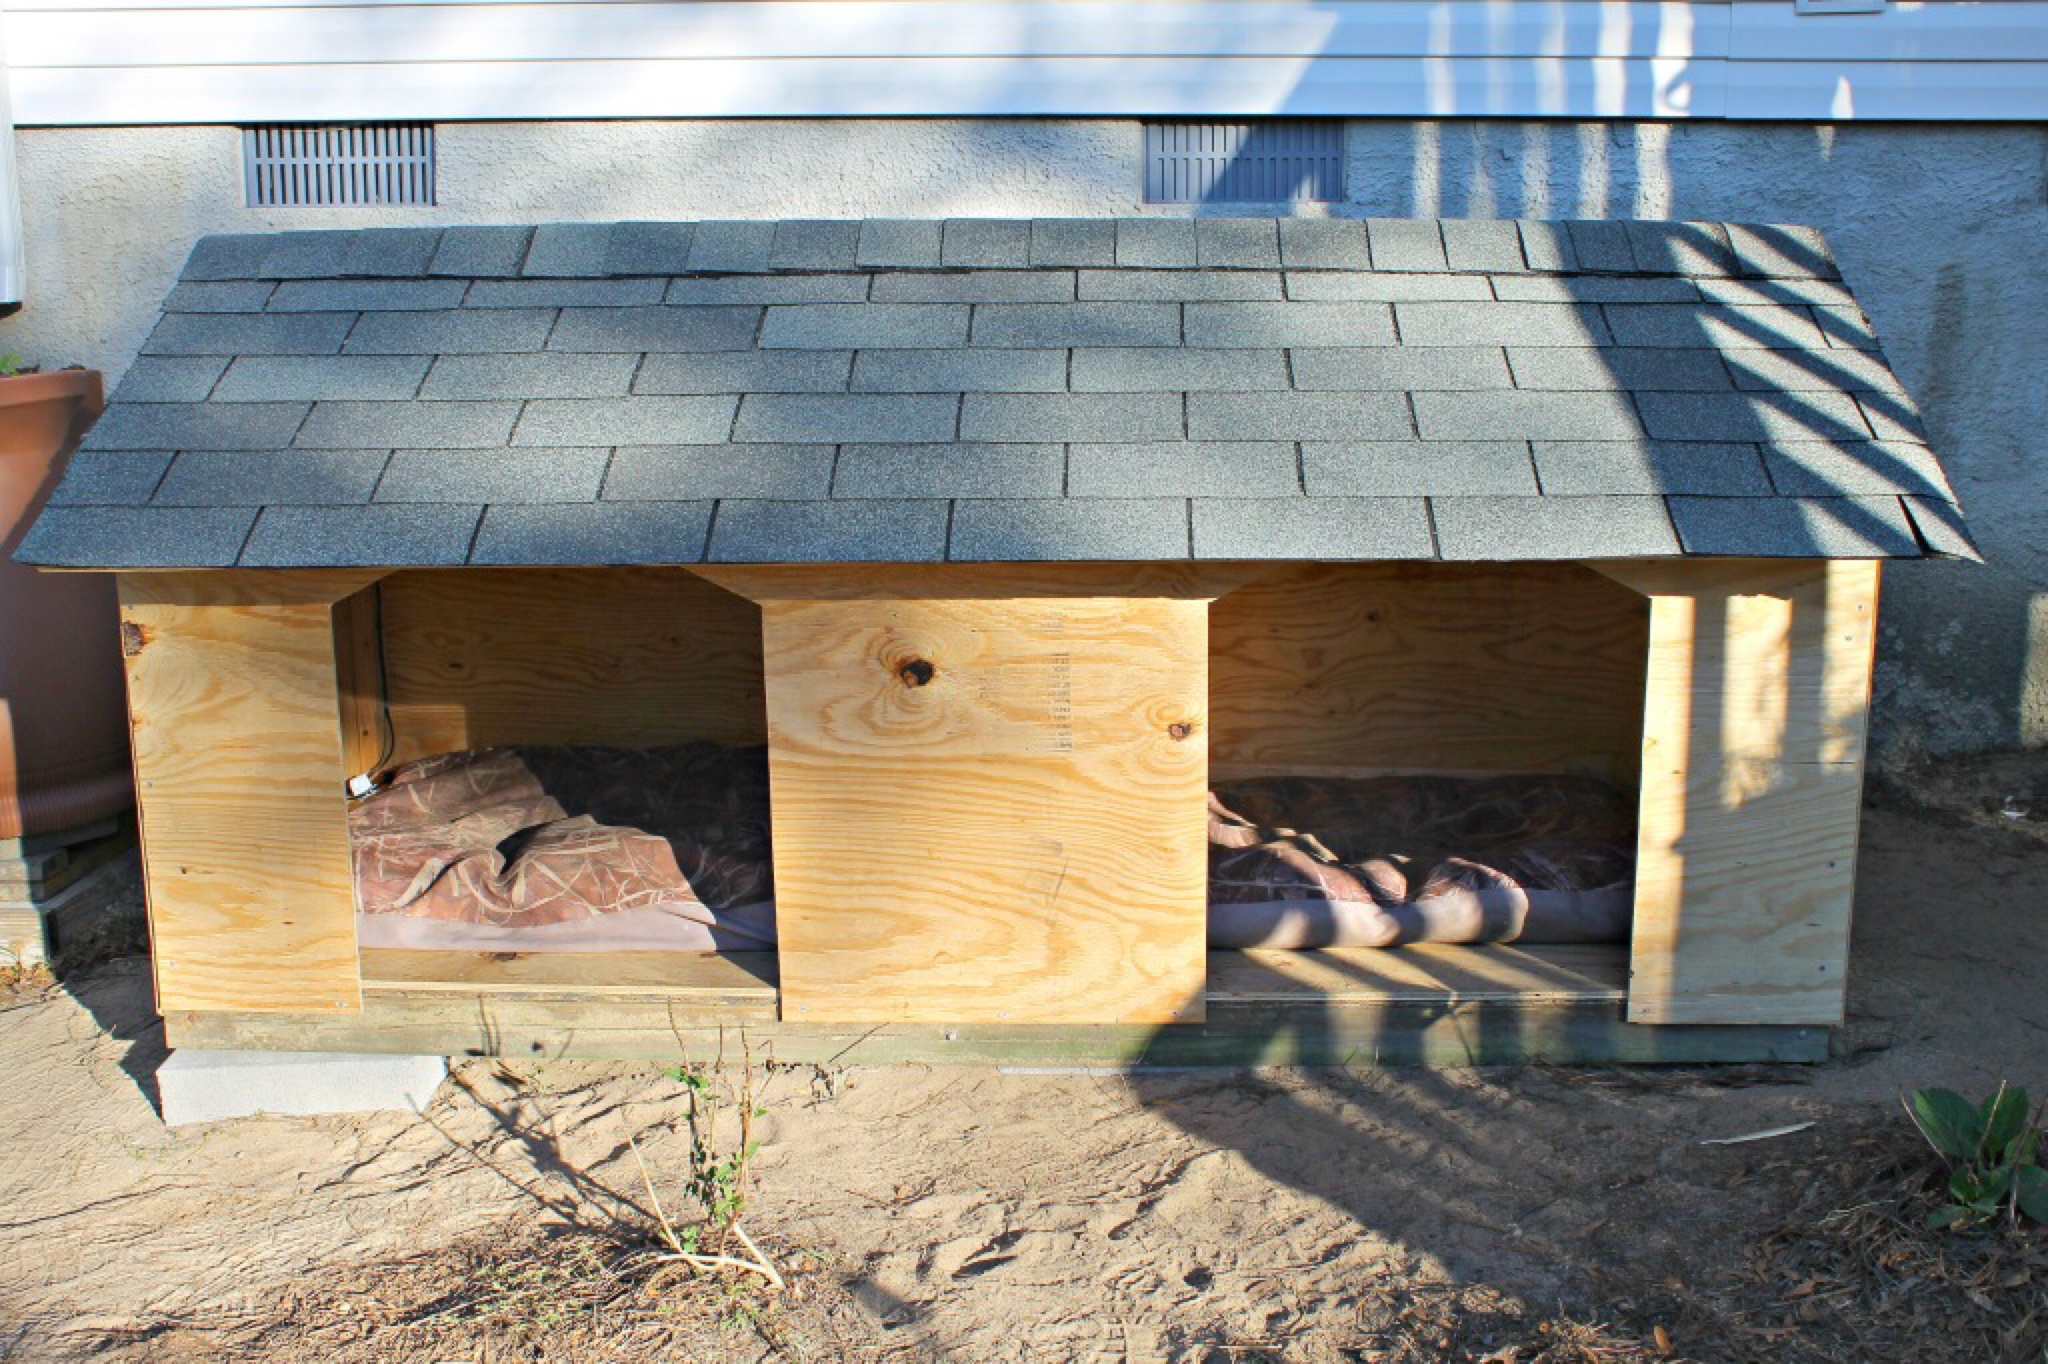 5 Droolworthy Diy Dog House Plans, Make Your Own Dog House Plans